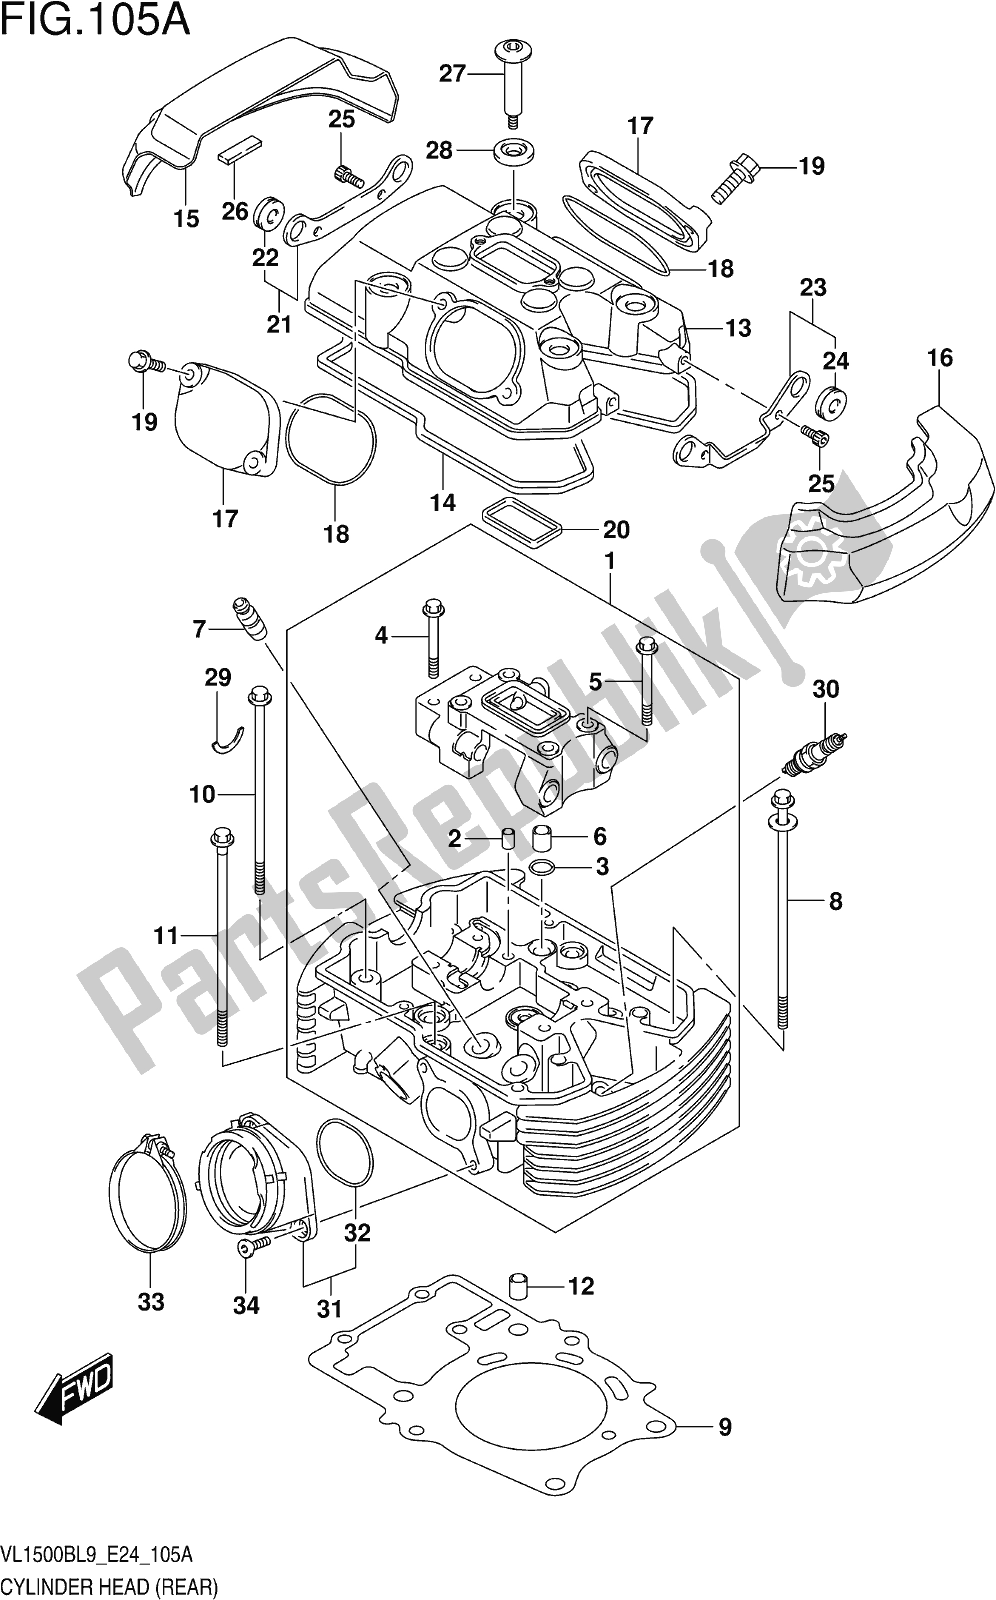 All parts for the Fig. 105a Cylinder Head (rear) of the Suzuki VL 1500B 2019